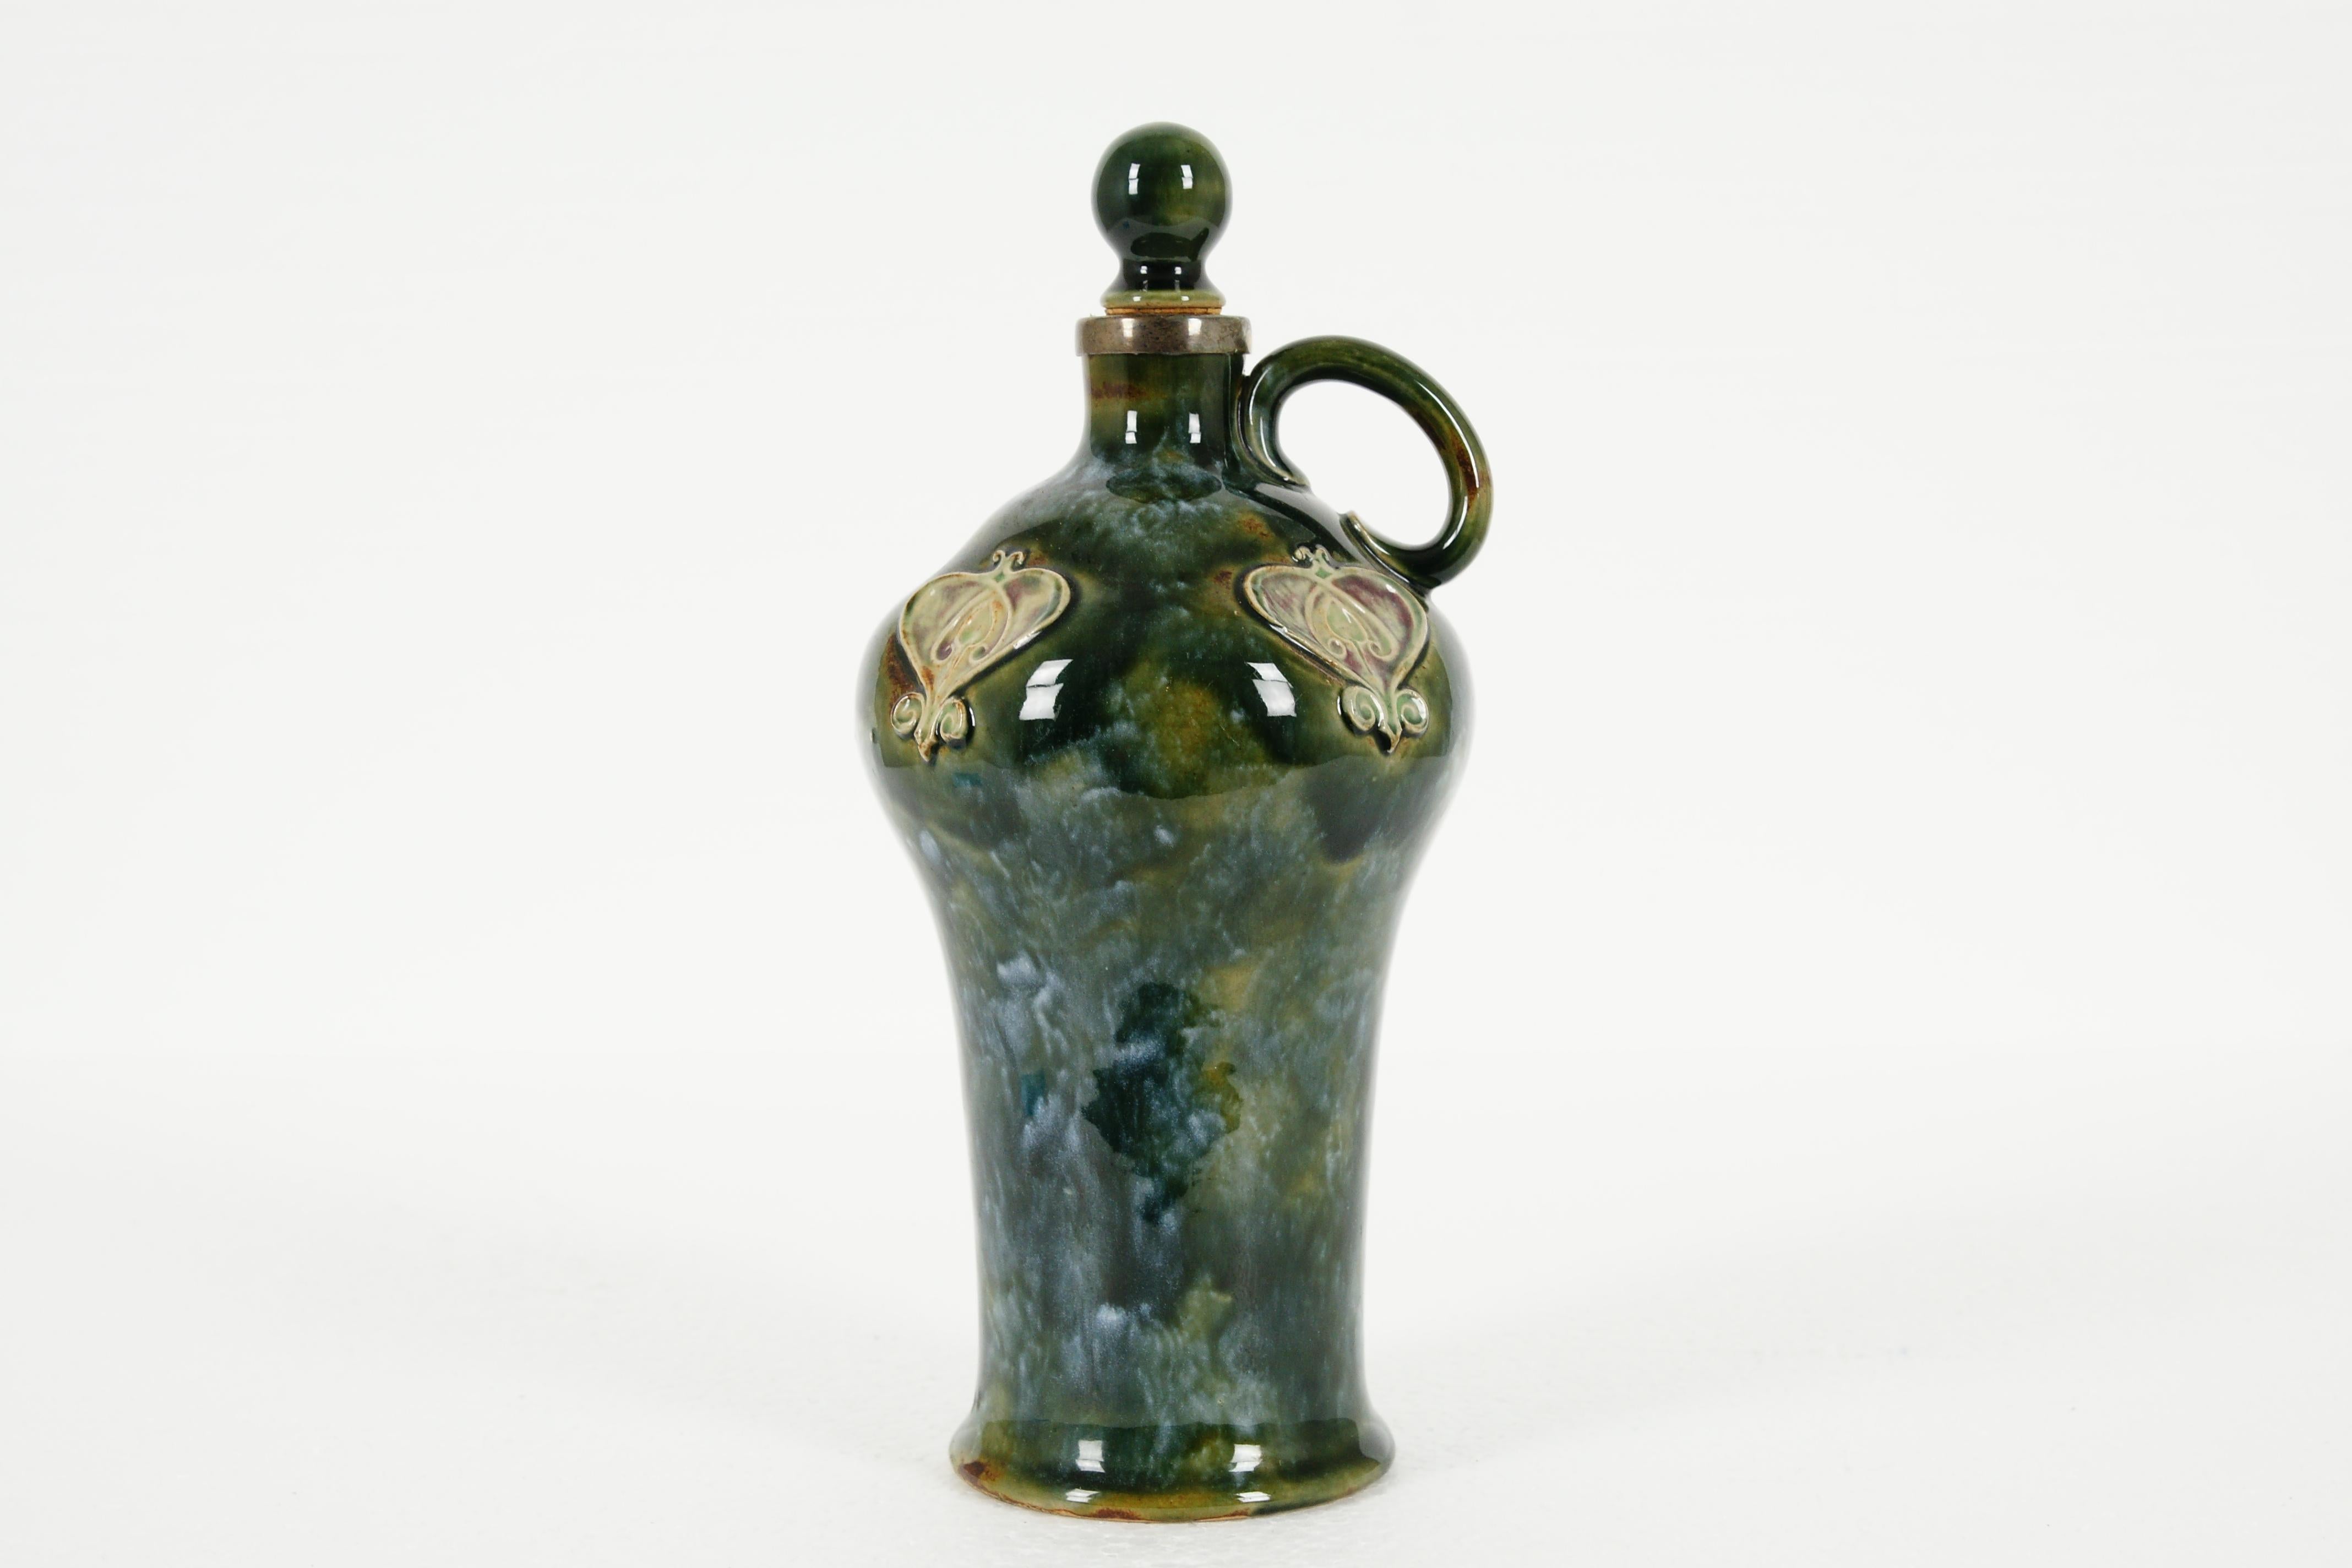 Antique Royal Doulton, Lambeth Stoneware, decanter/whisky bottle, with stopper. 9313, B1971

Inverse baluster shape with green glaze
Decorated with Art Nouveau design
Shaped handle to the side
Marked with Doulton Lambeth
Excellent